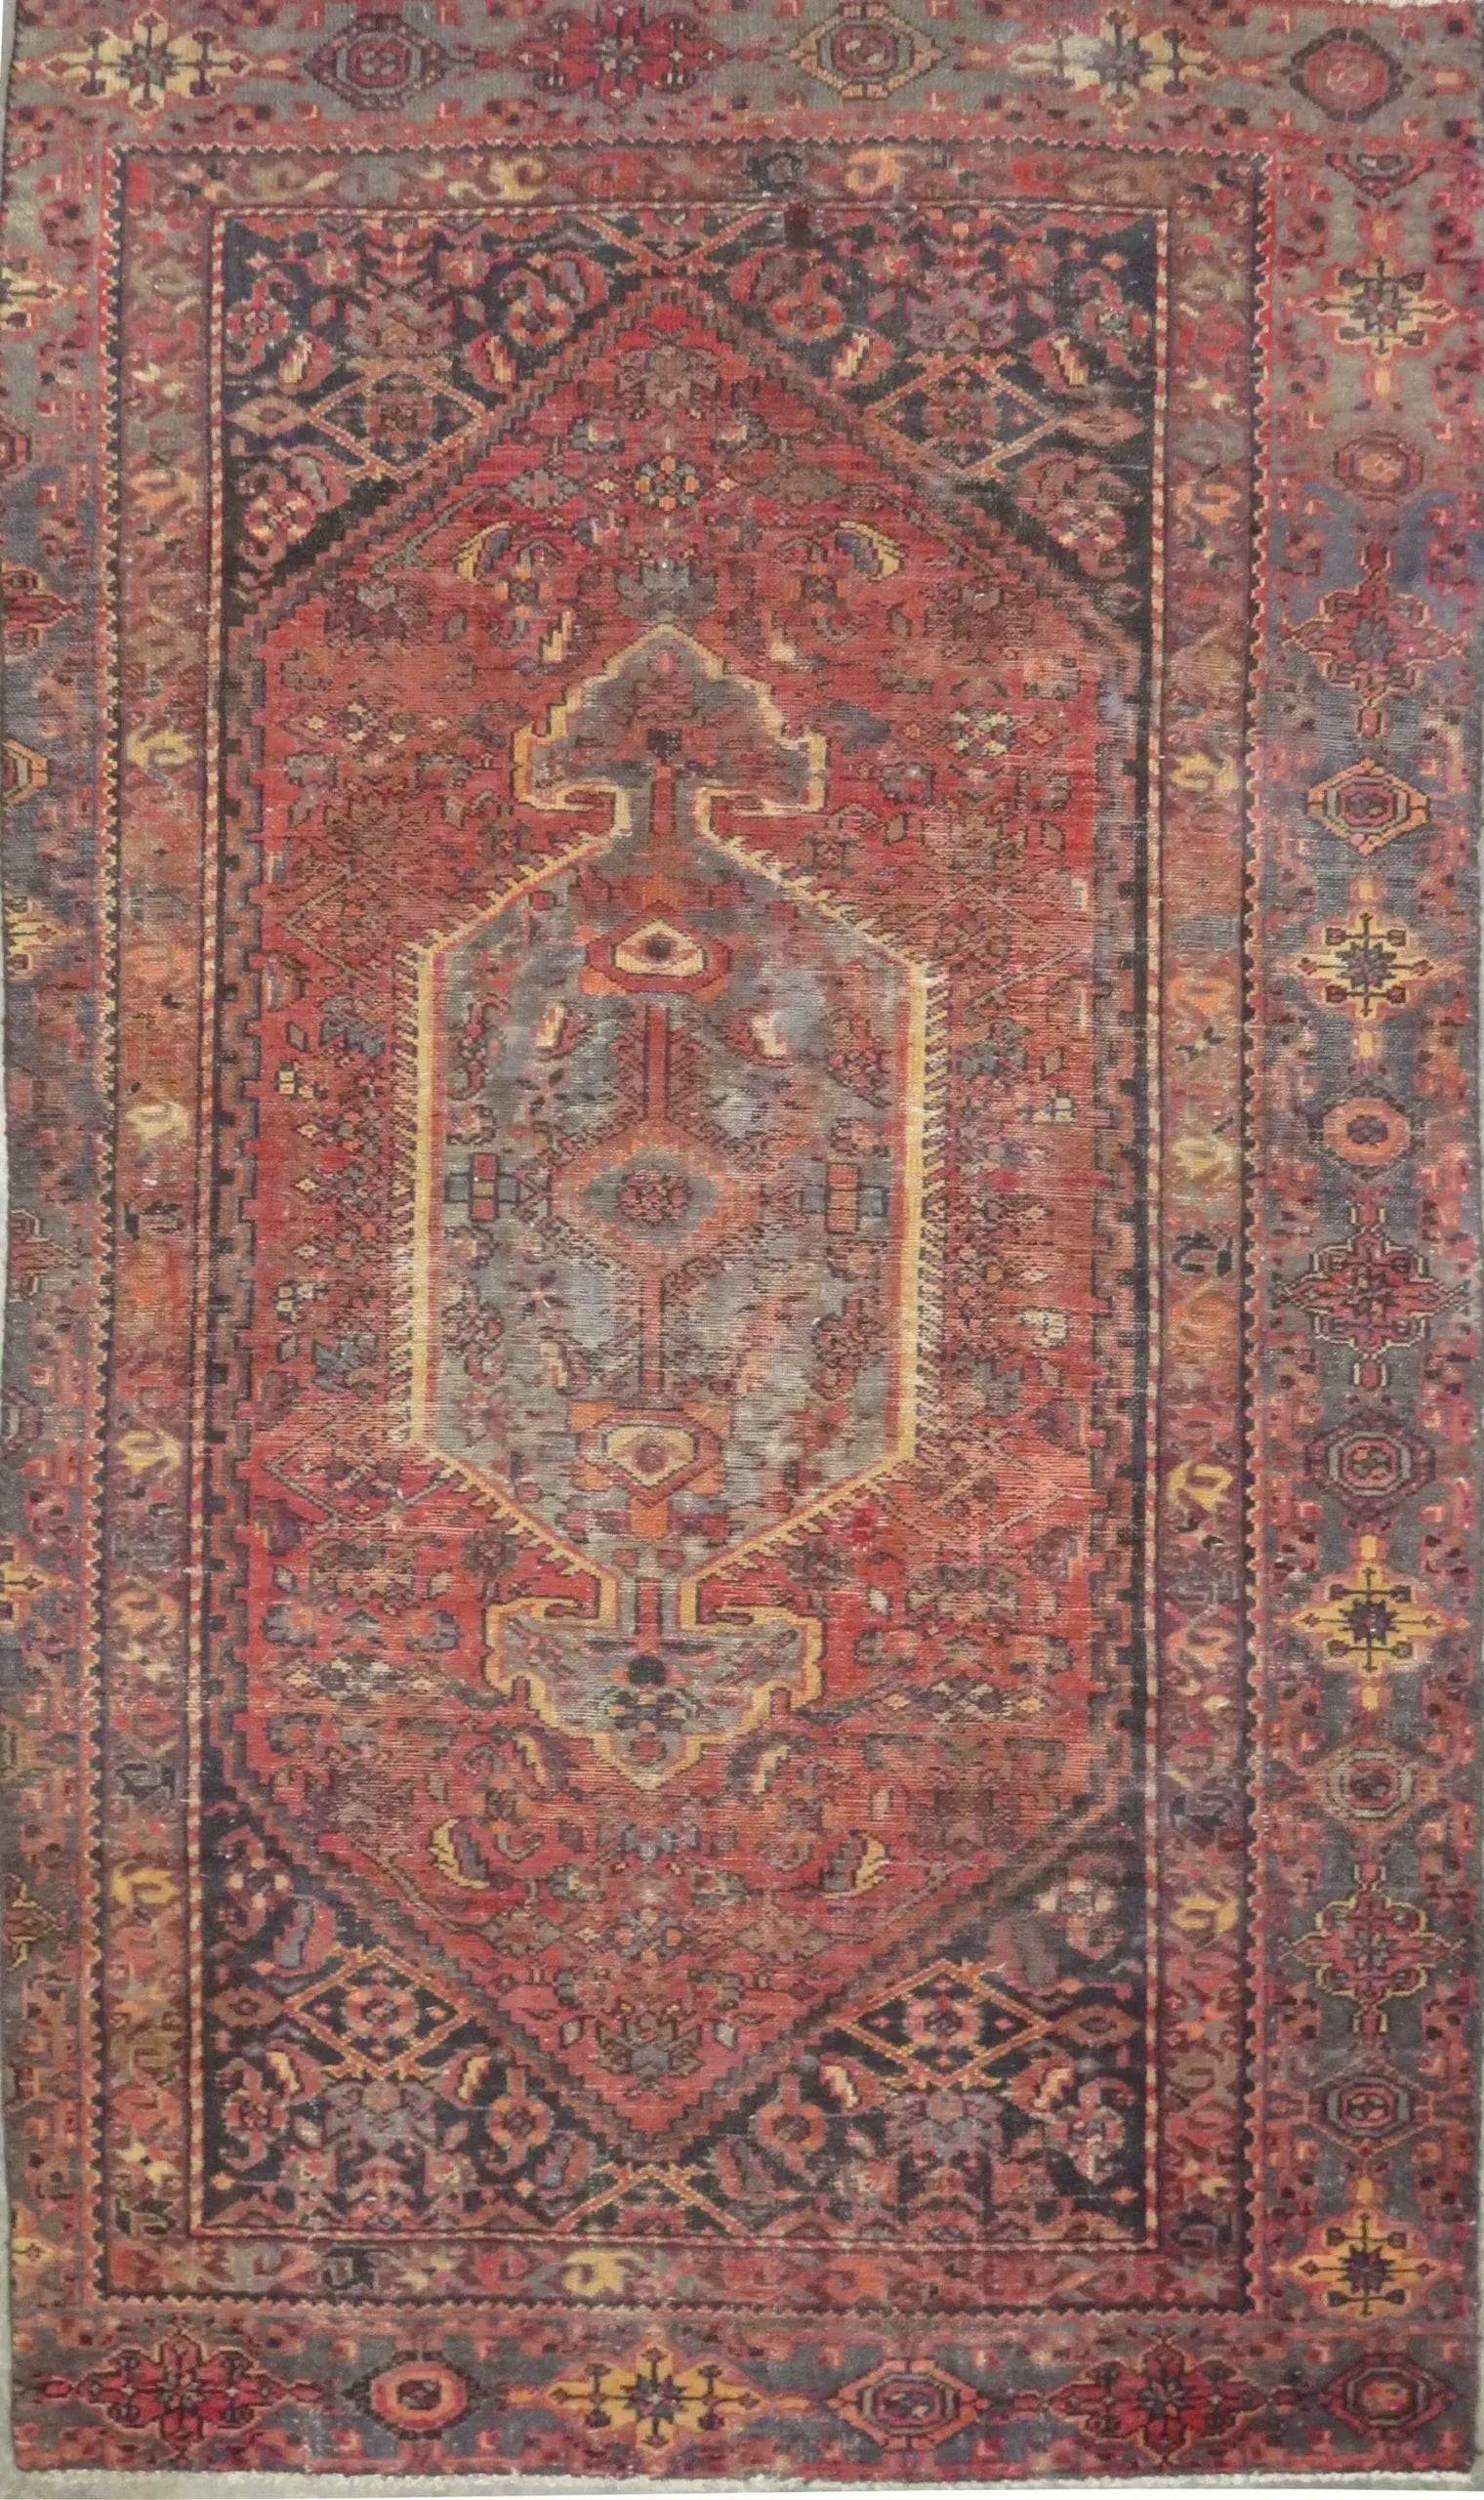 Hand-Knotted Persian Wool Rug _ Luxurious Vintage Design, 6'4" x 3'6", Artisan Crafted